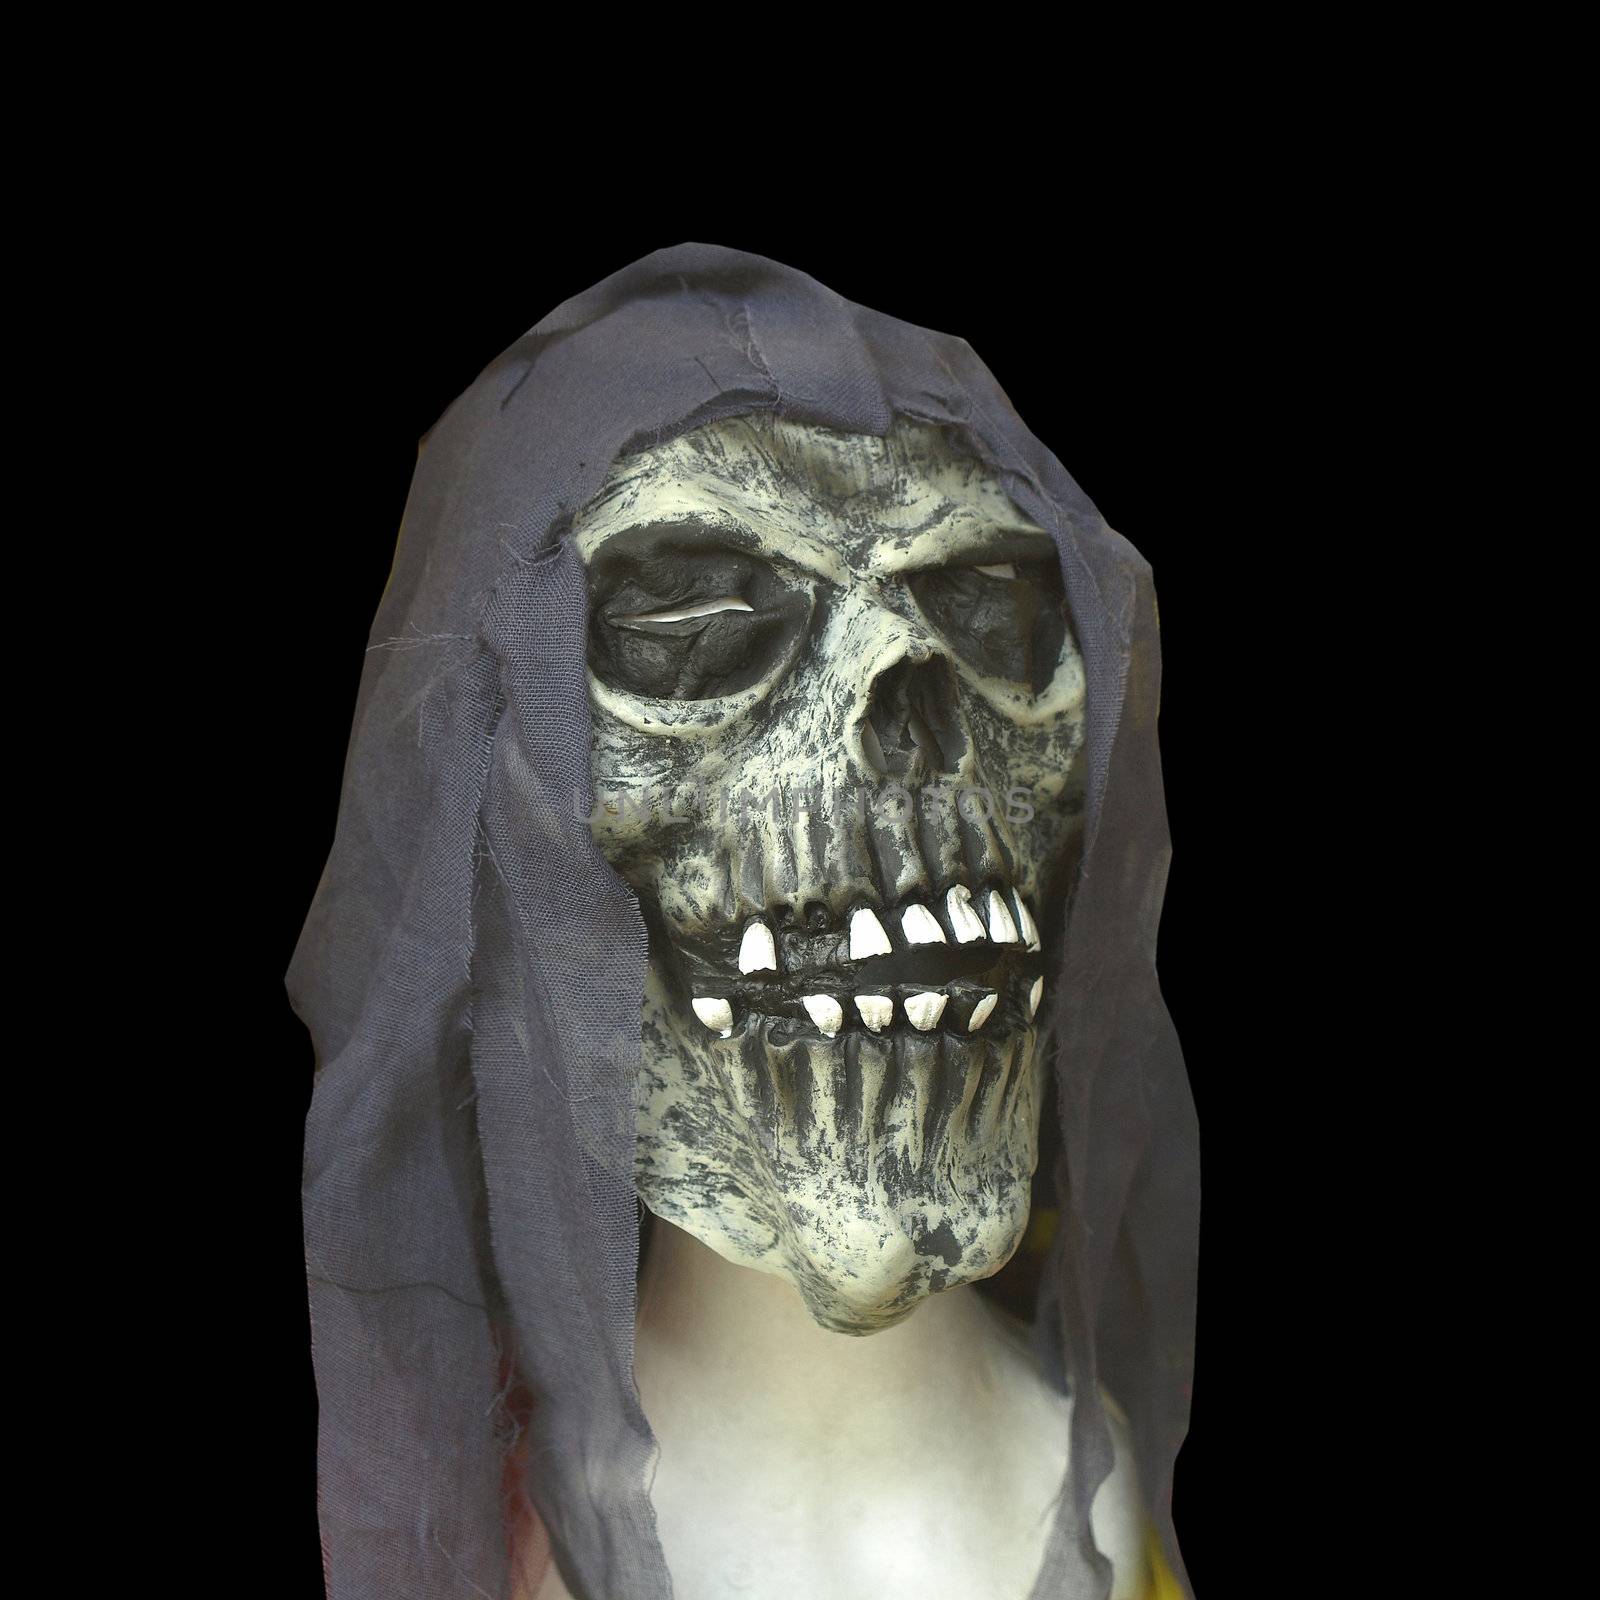 Halloween skull representing mask of the death over black